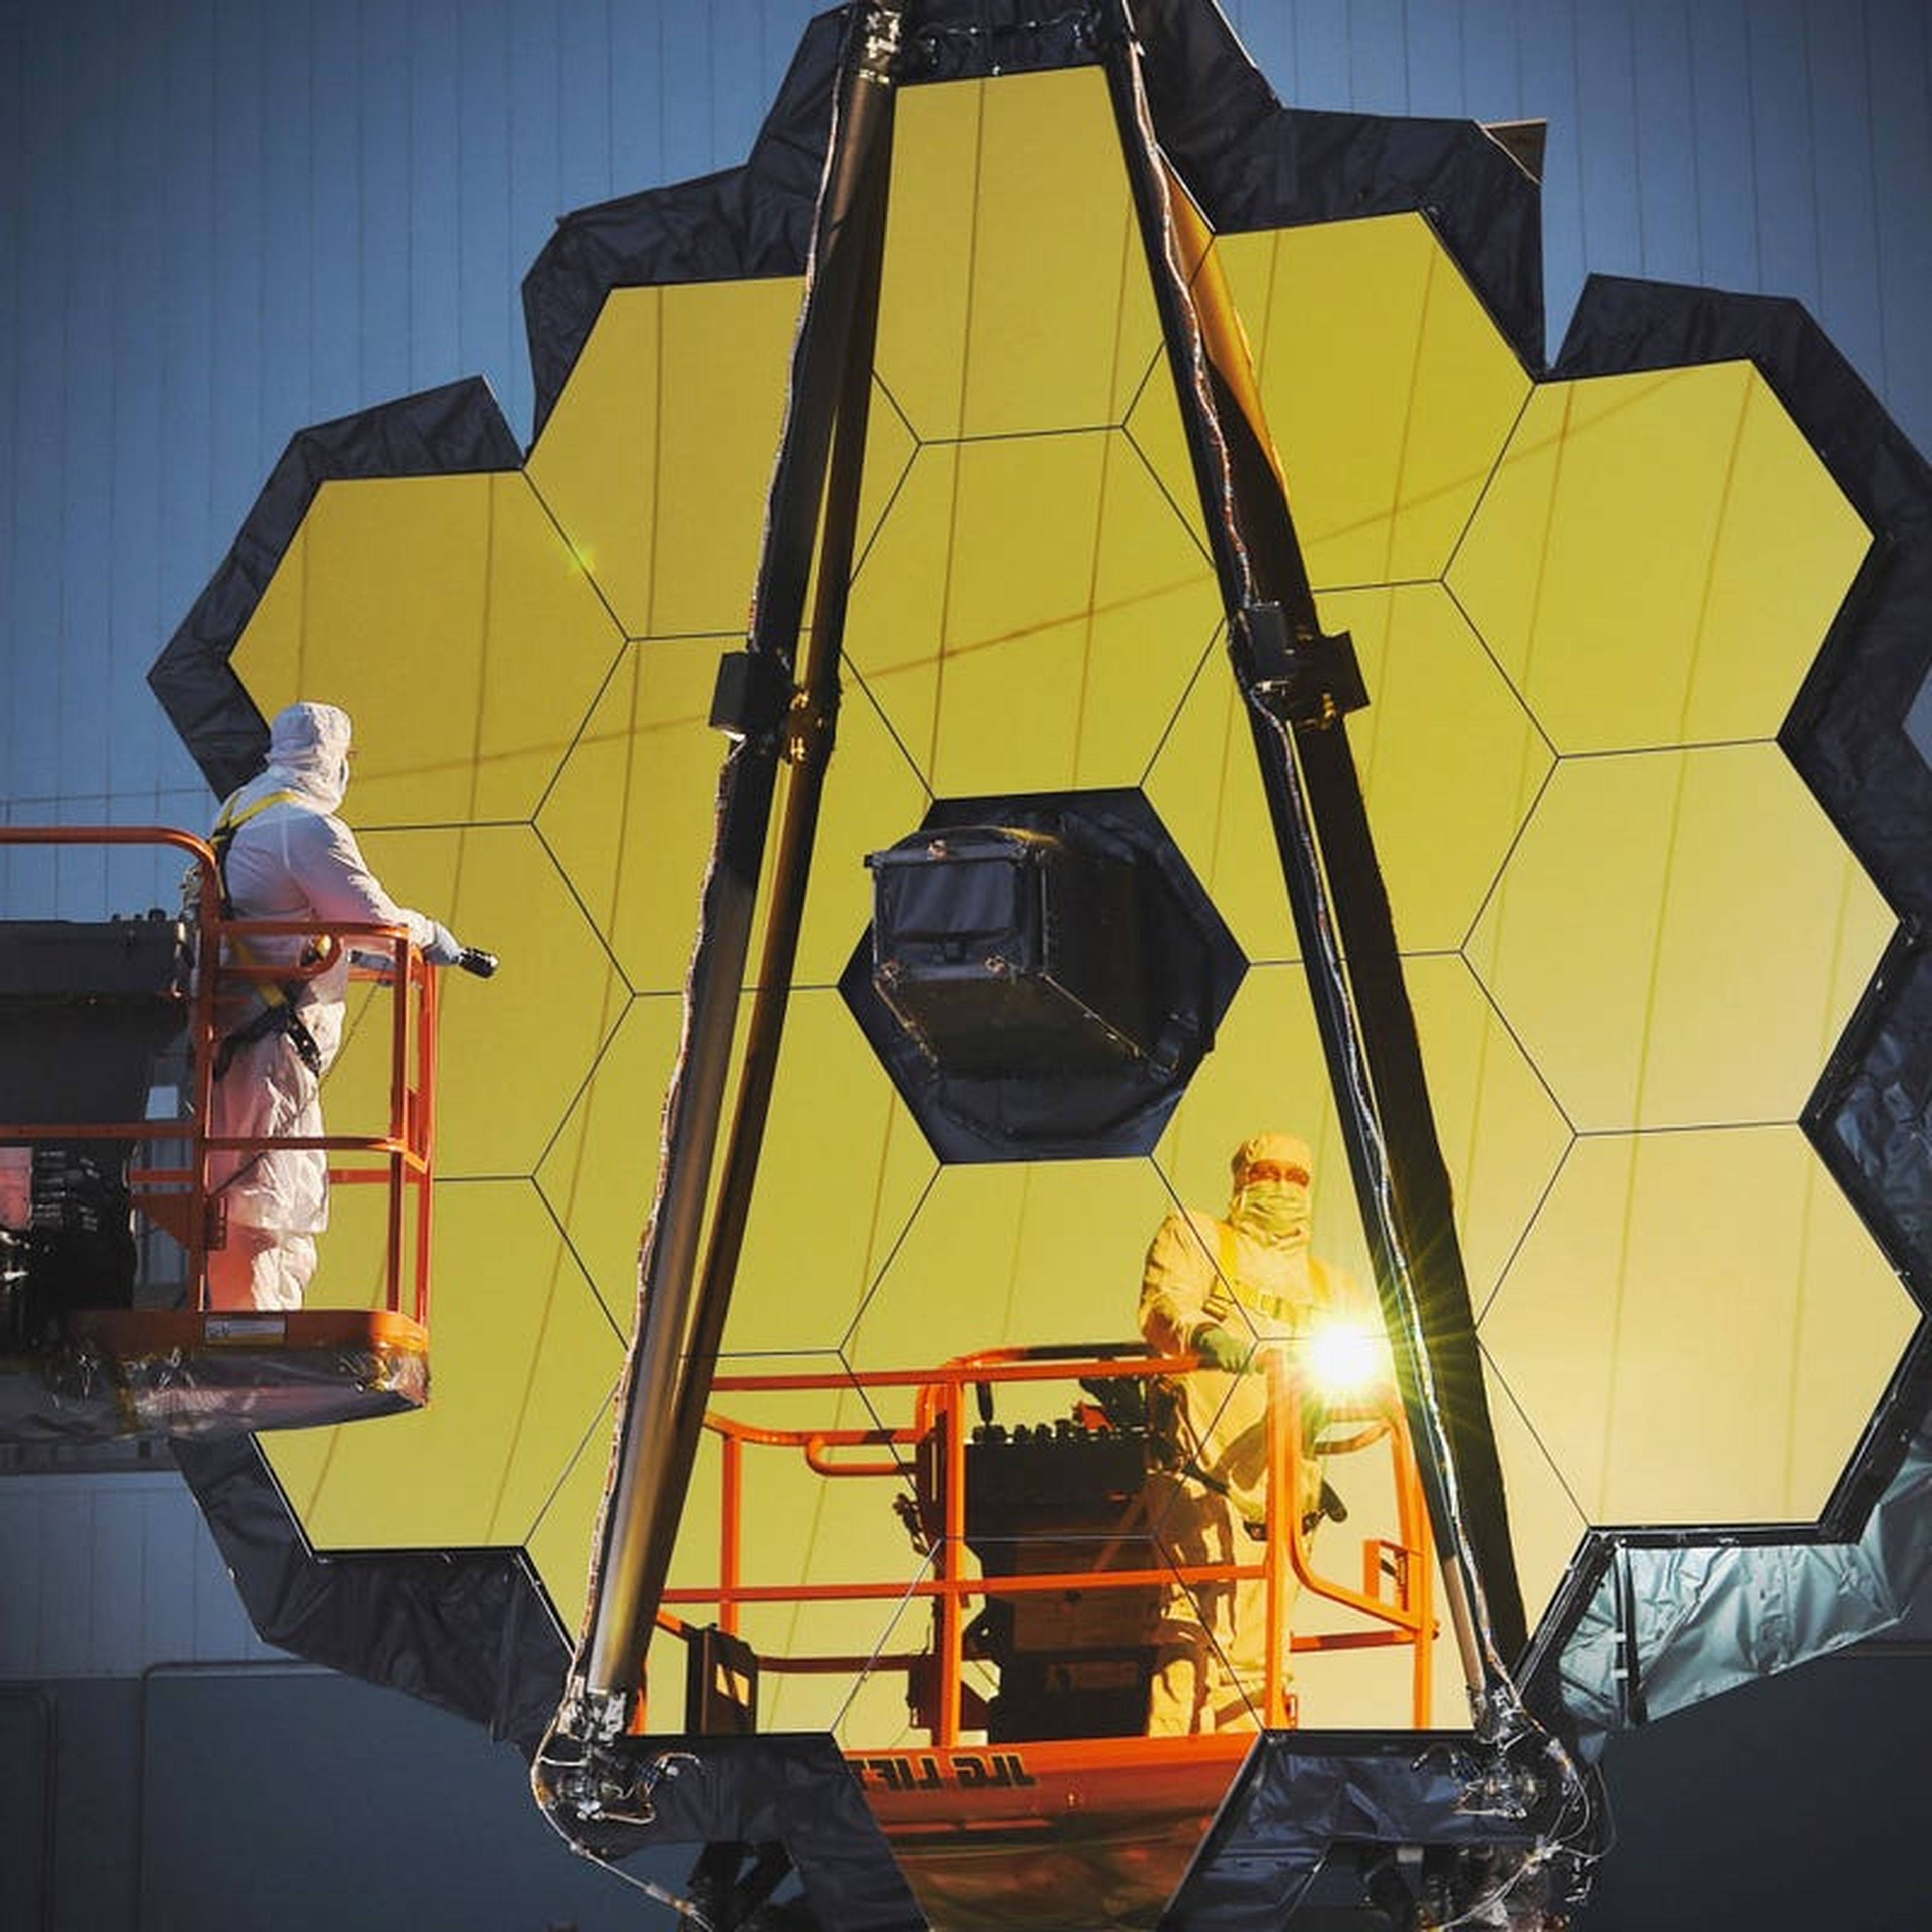 Engineers and technicians work on the James Webb Space Telescope, October 14, 2016.